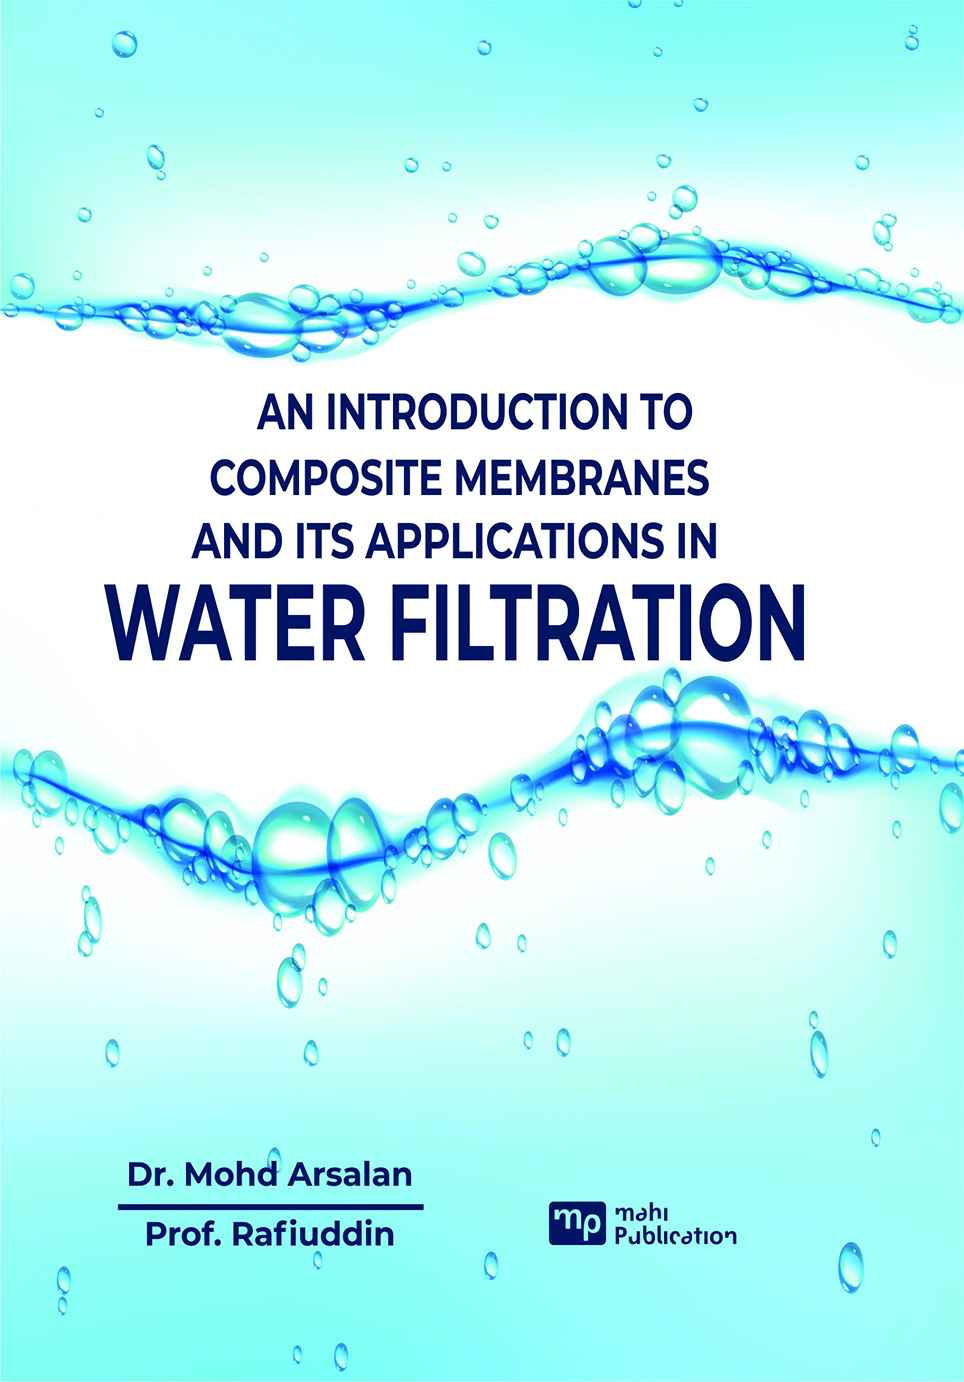 An Introduction to Composite Membranes and its Applications in Water Filtration